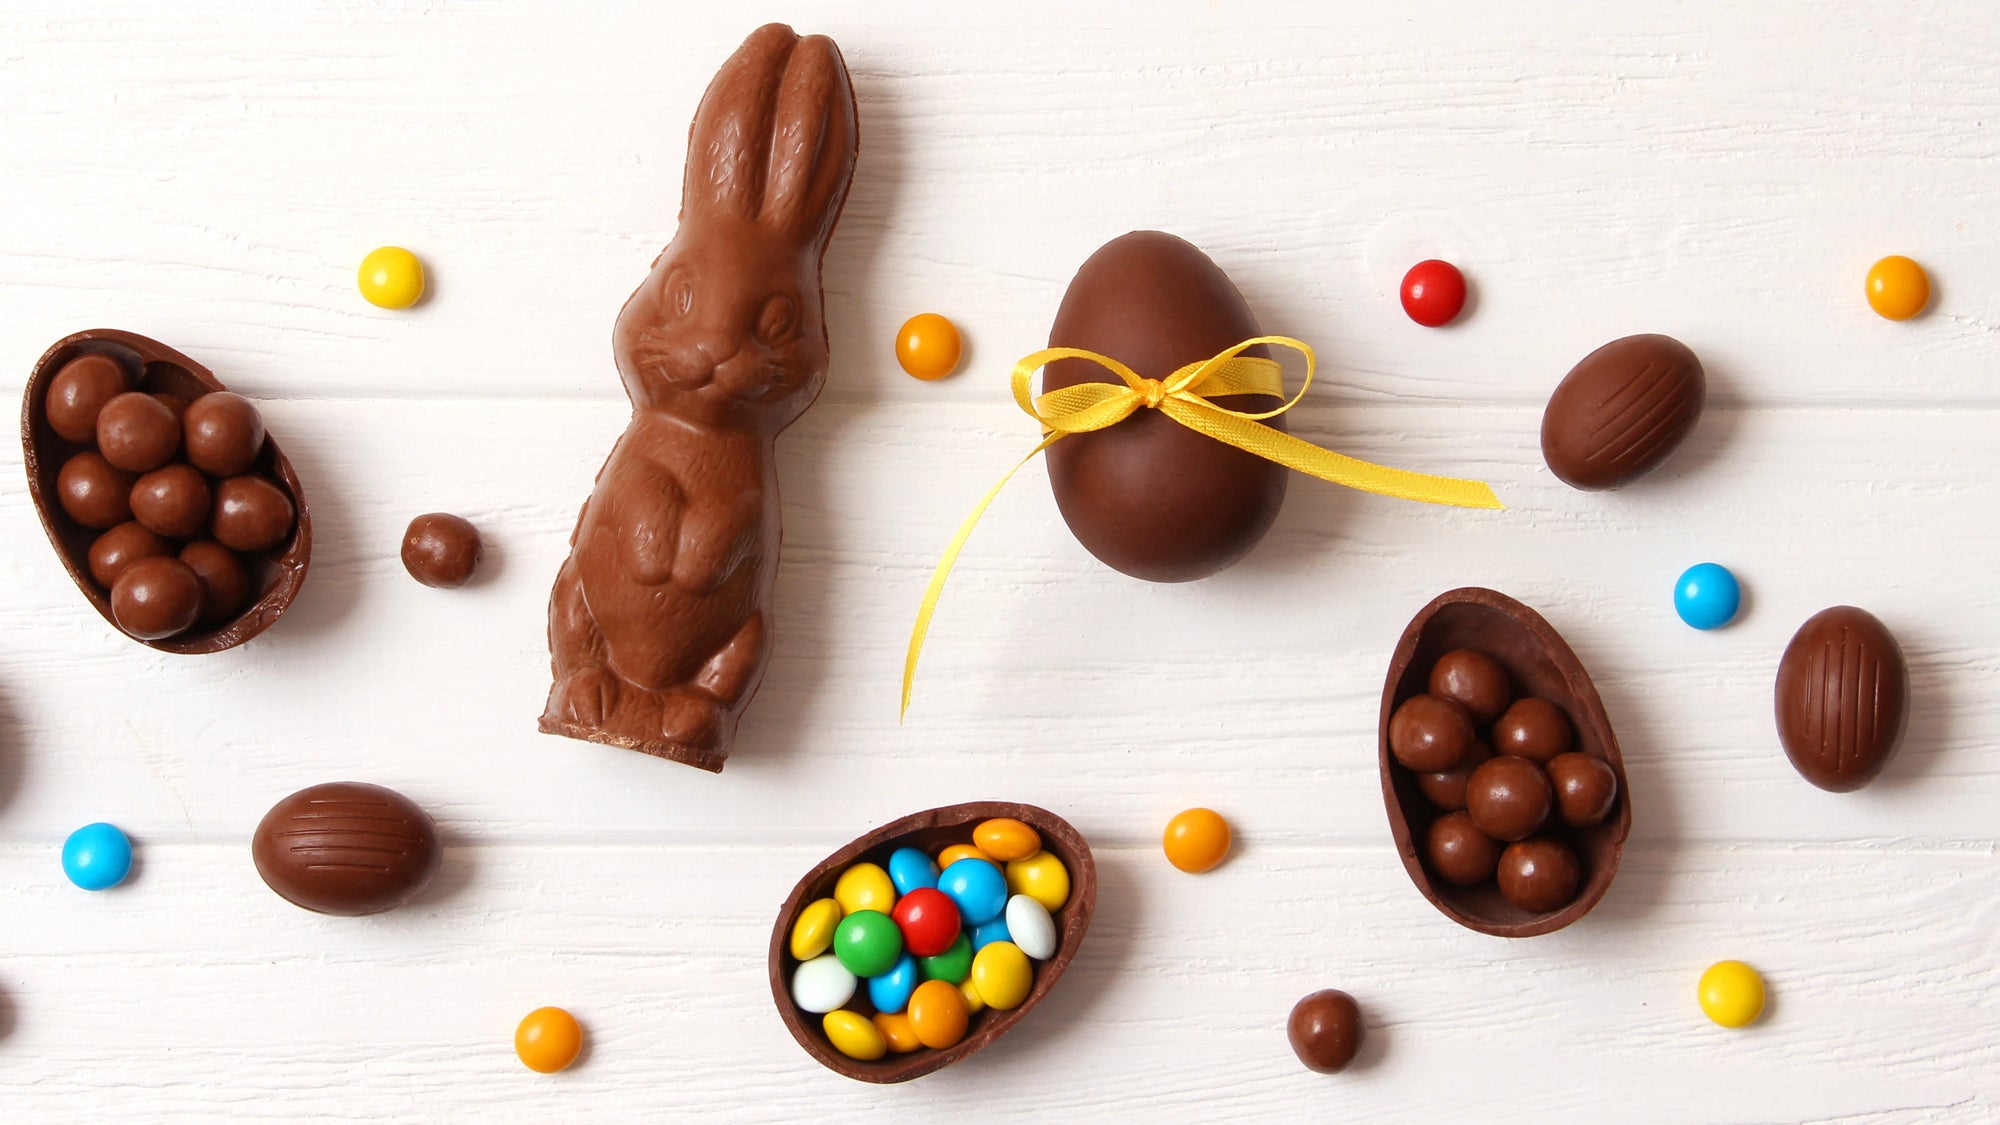 Chocolate Easter Bunny, eggs and candies spread out on a table